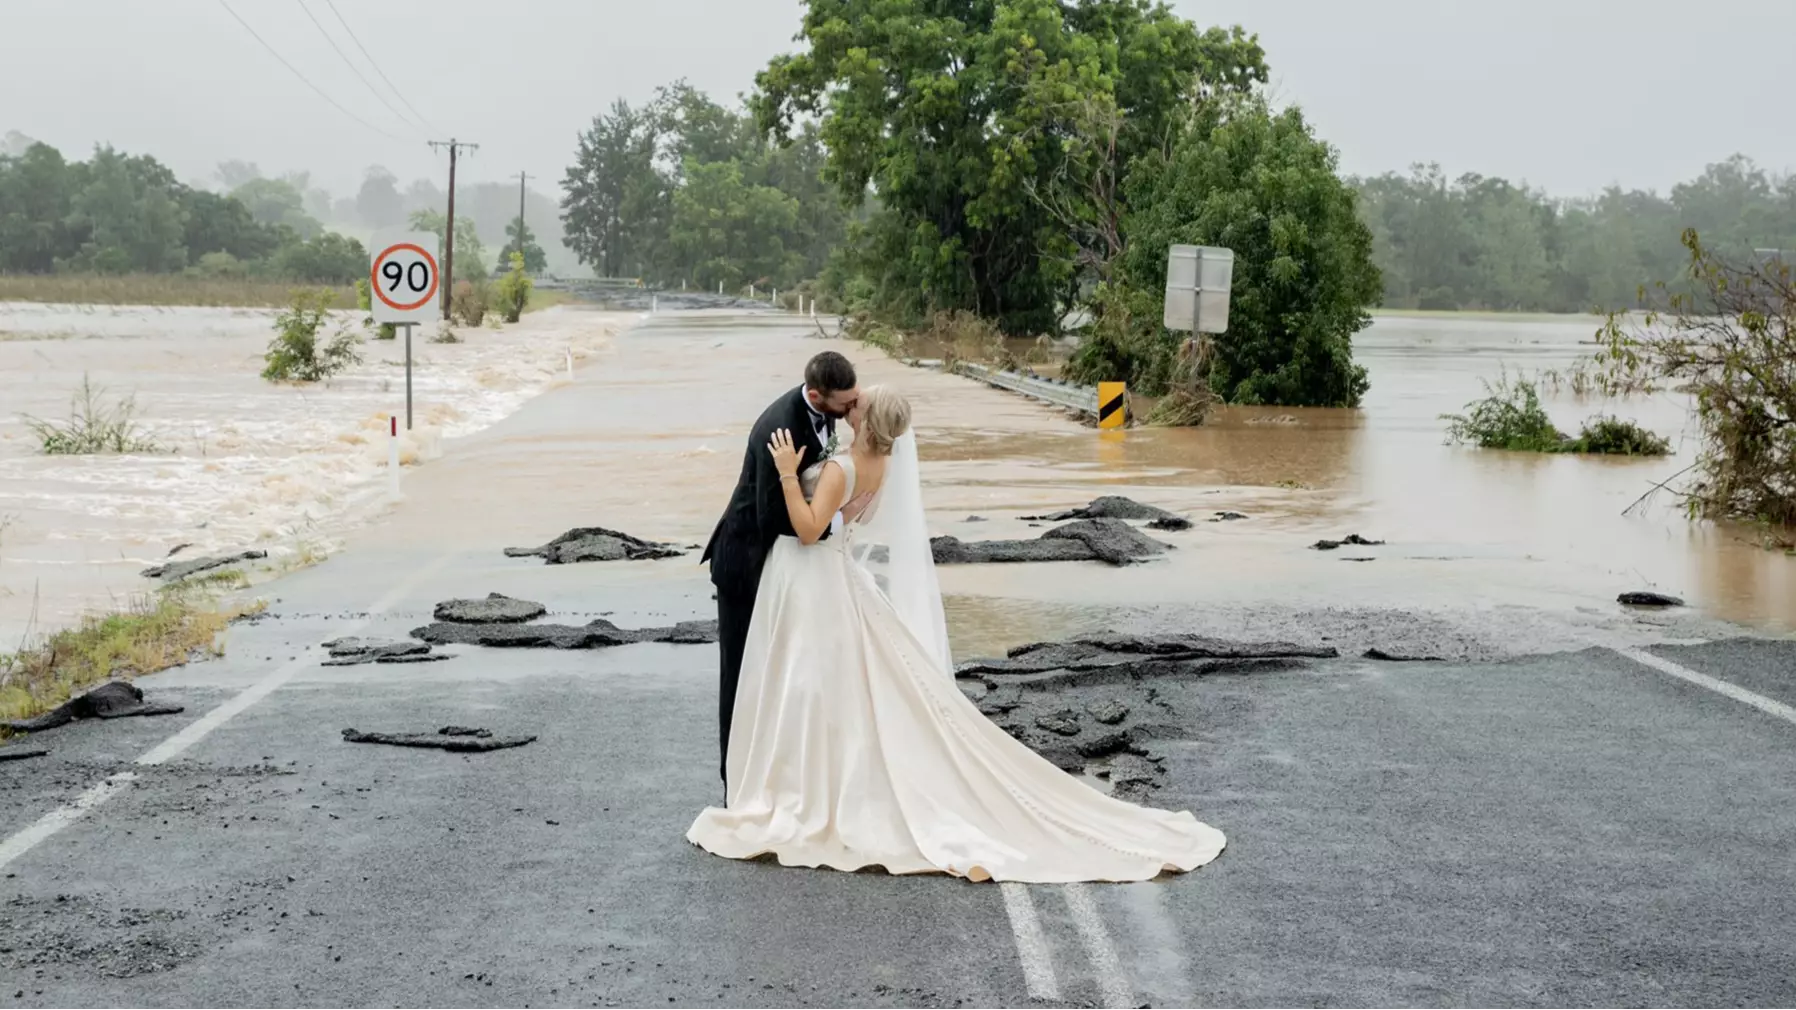 Couple Caught In Floodwaters On Wedding Day Get Airlifted To Ensure They Get Married